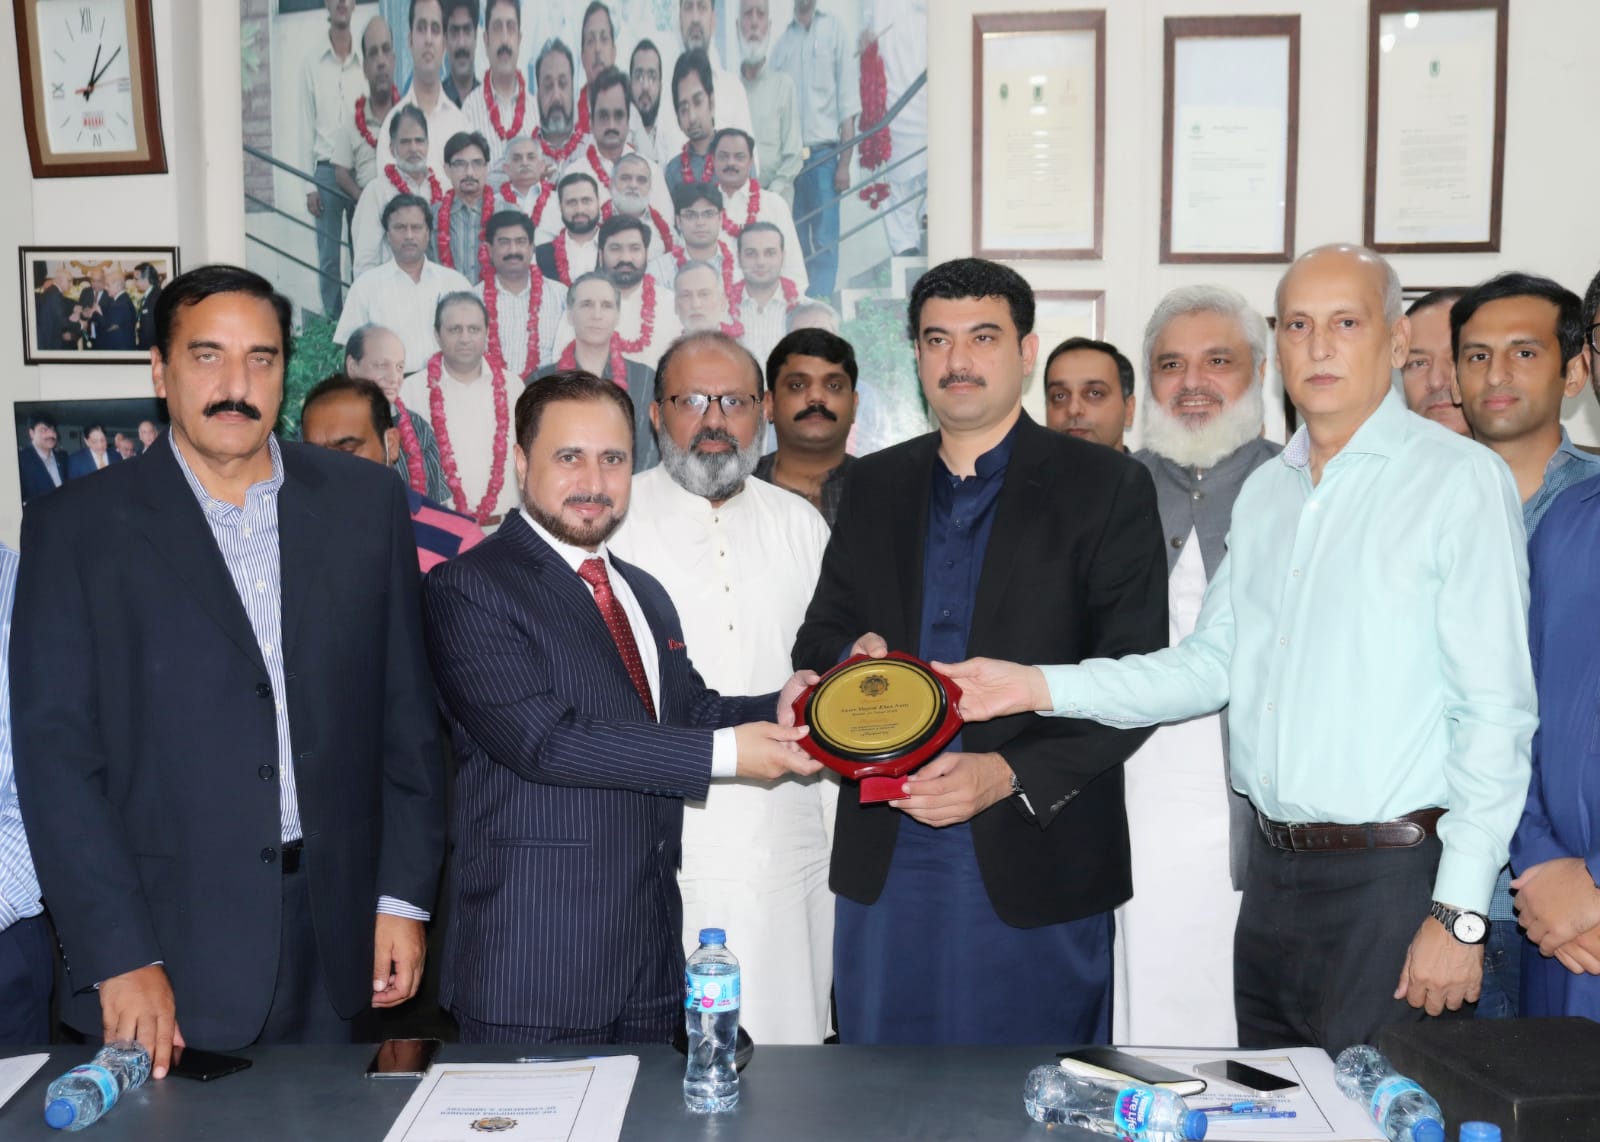 MEETING HELD IN SCCI ON 12 OCTOBER 2021. Mr. Ansar Majeed Niazi Provincial Minister for labor and human resource, Mian Sana Ullah Suleman President SCCI, Manzoor-Ul-Haq Malik Group Head SCCI